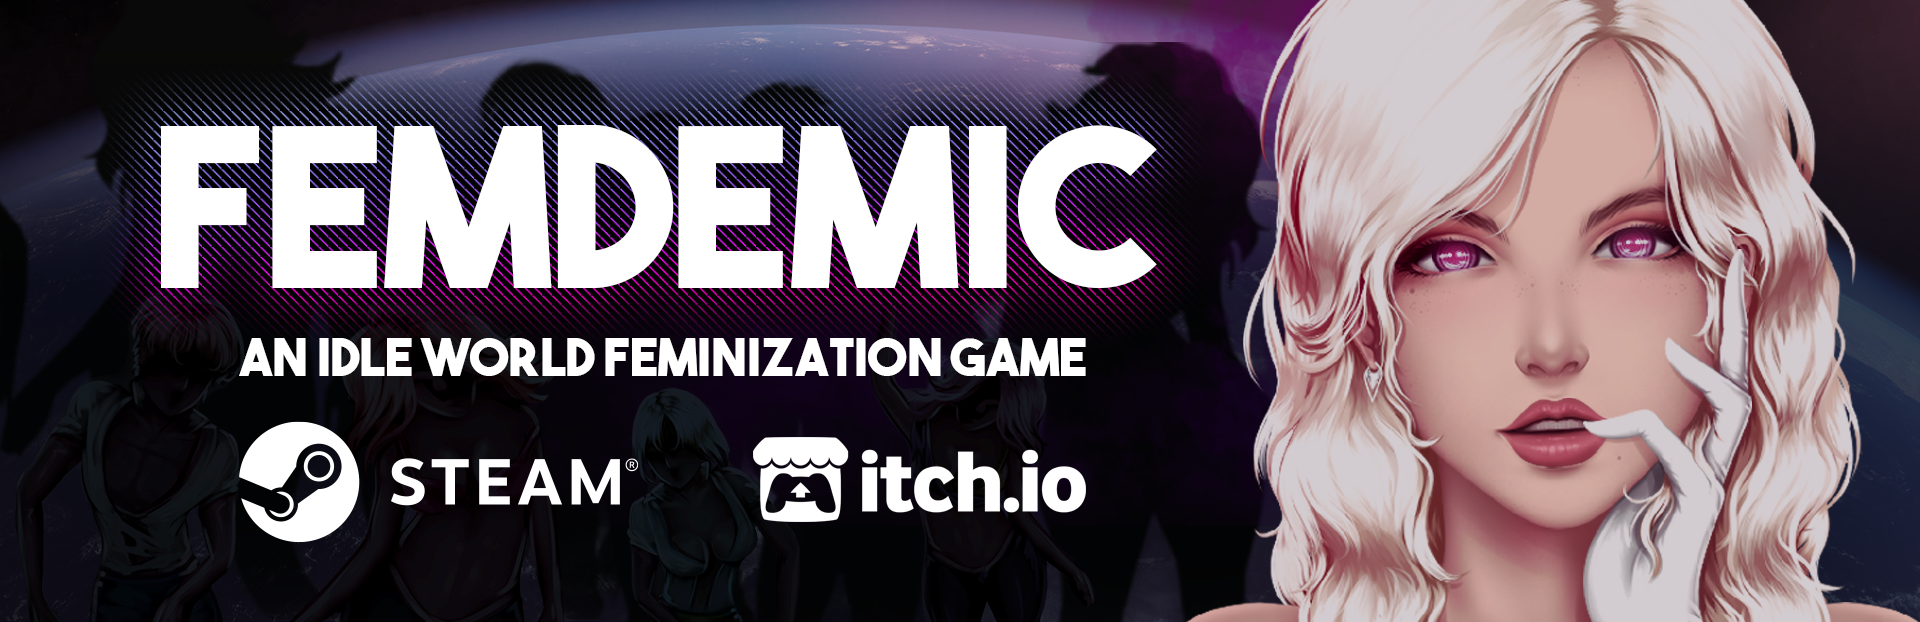 Femdemic on Steam and itch.io